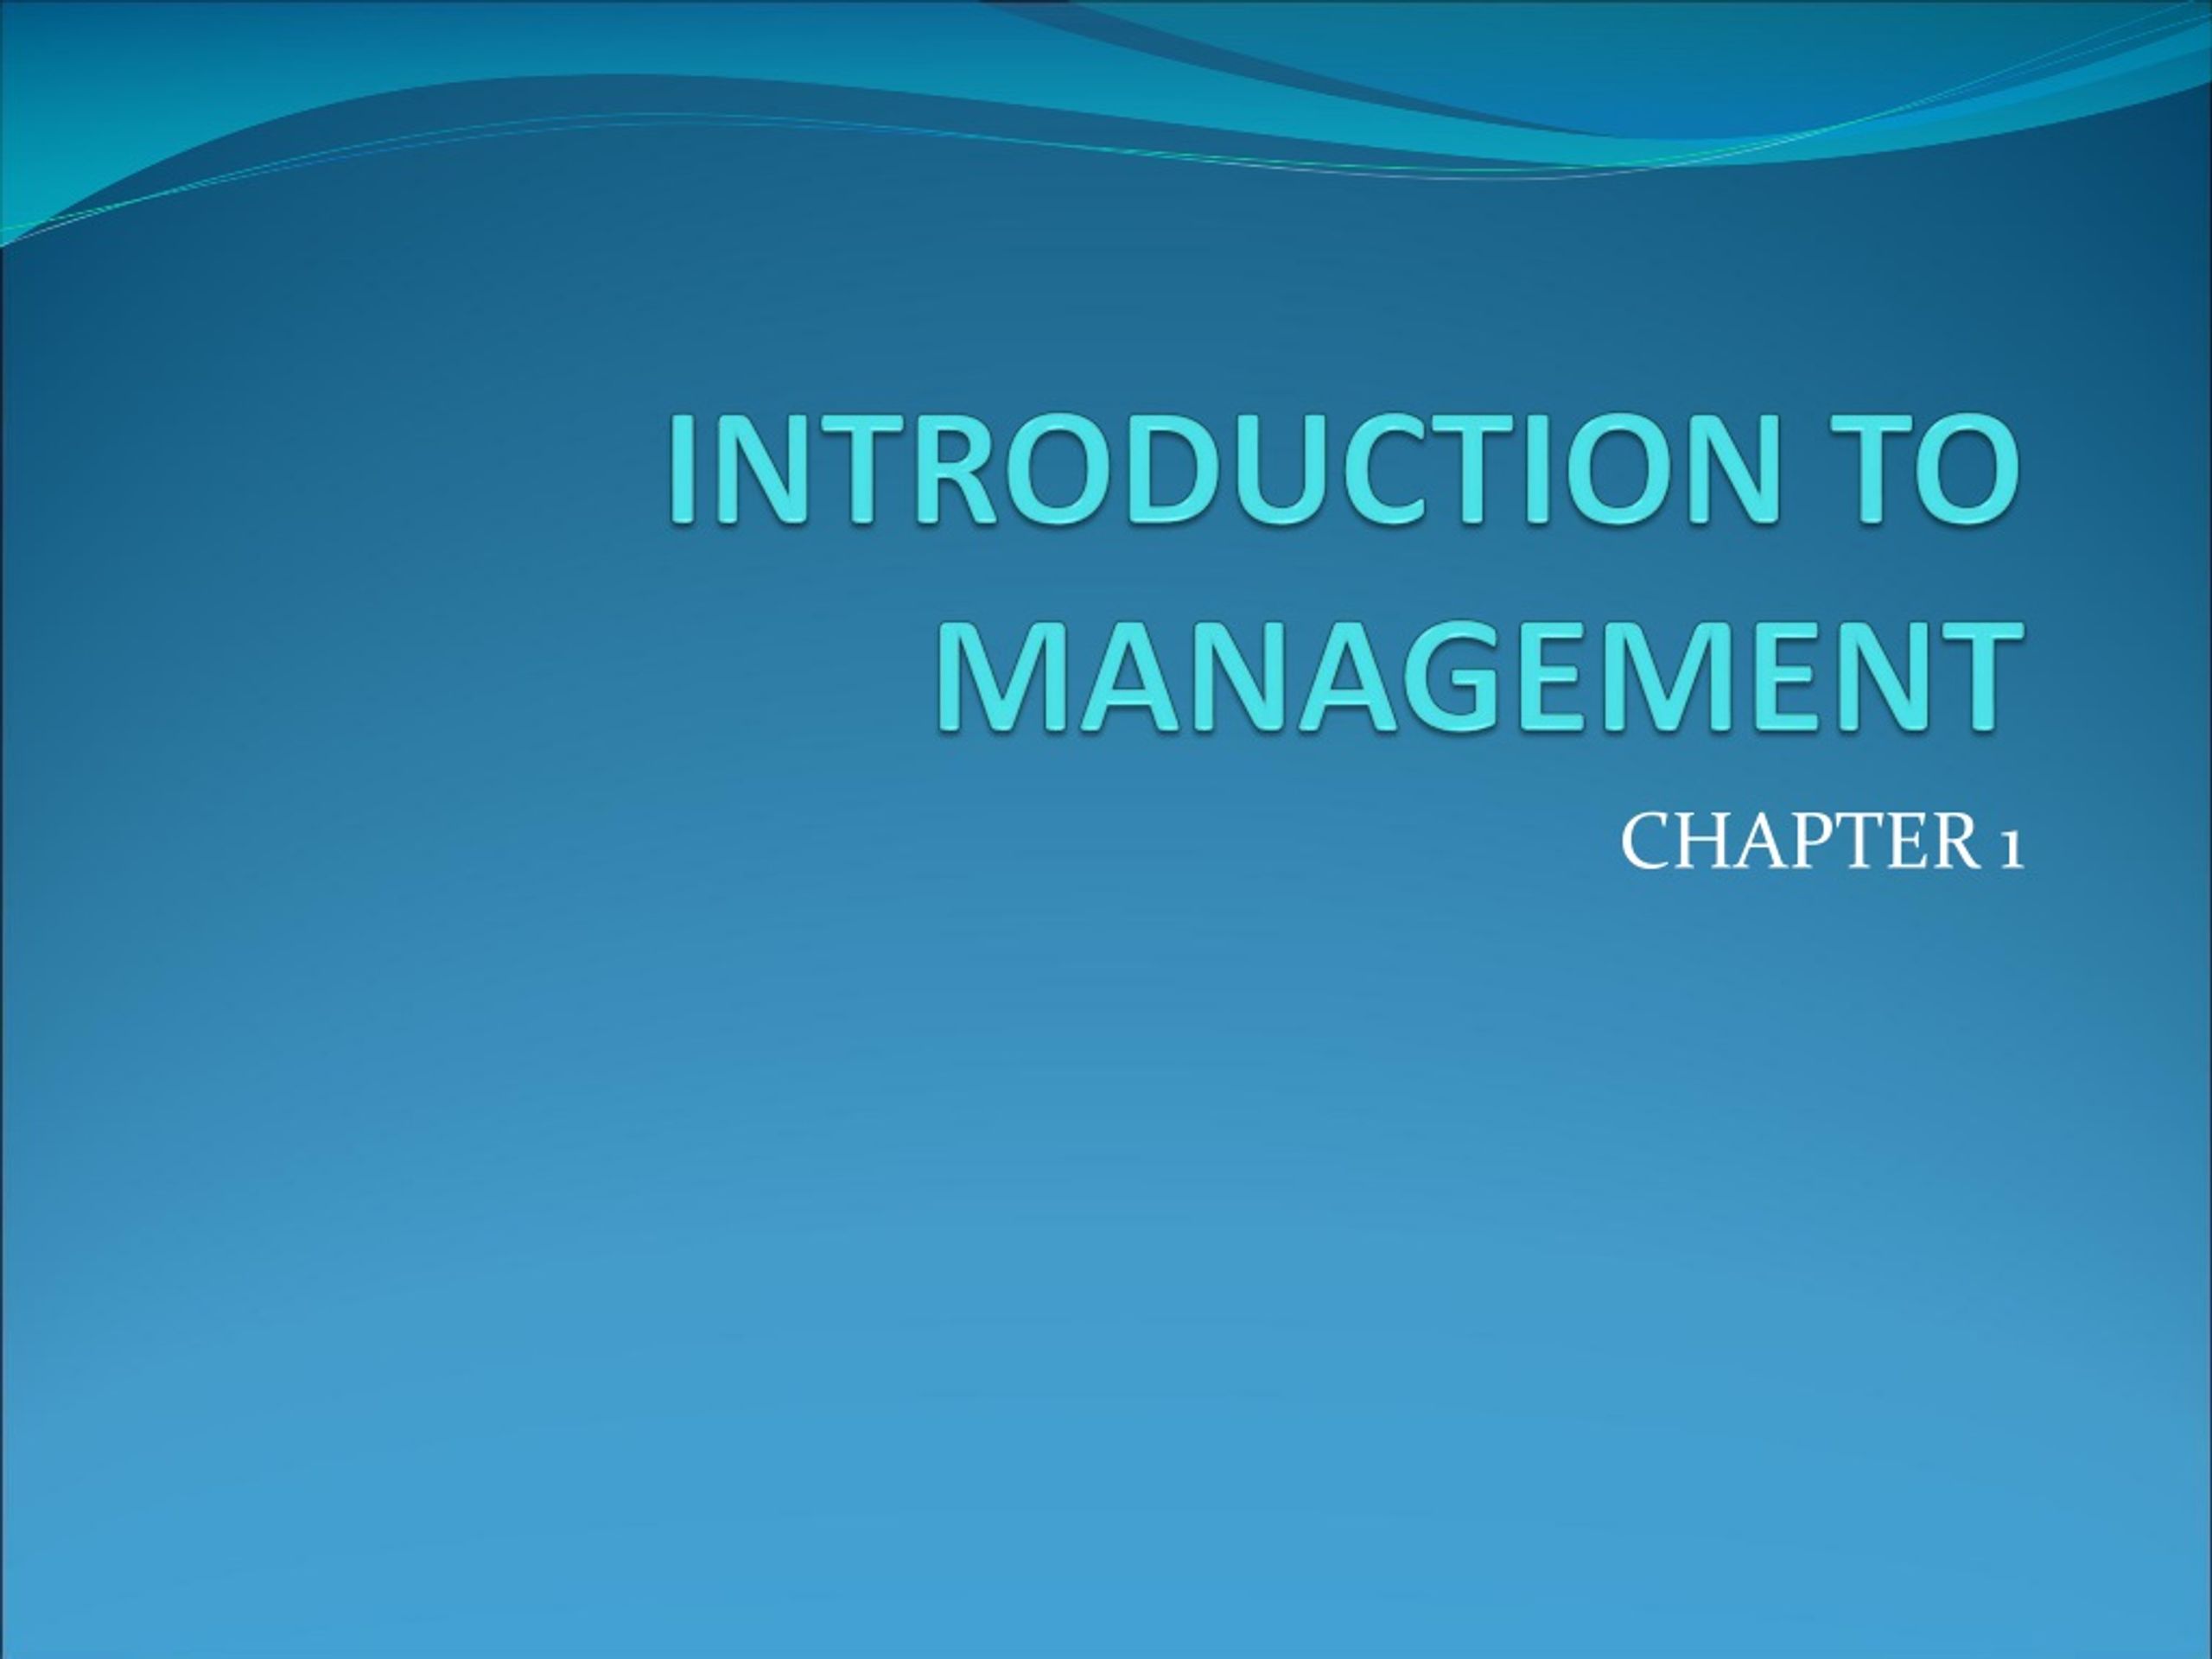 introduction to management powerpoint presentation